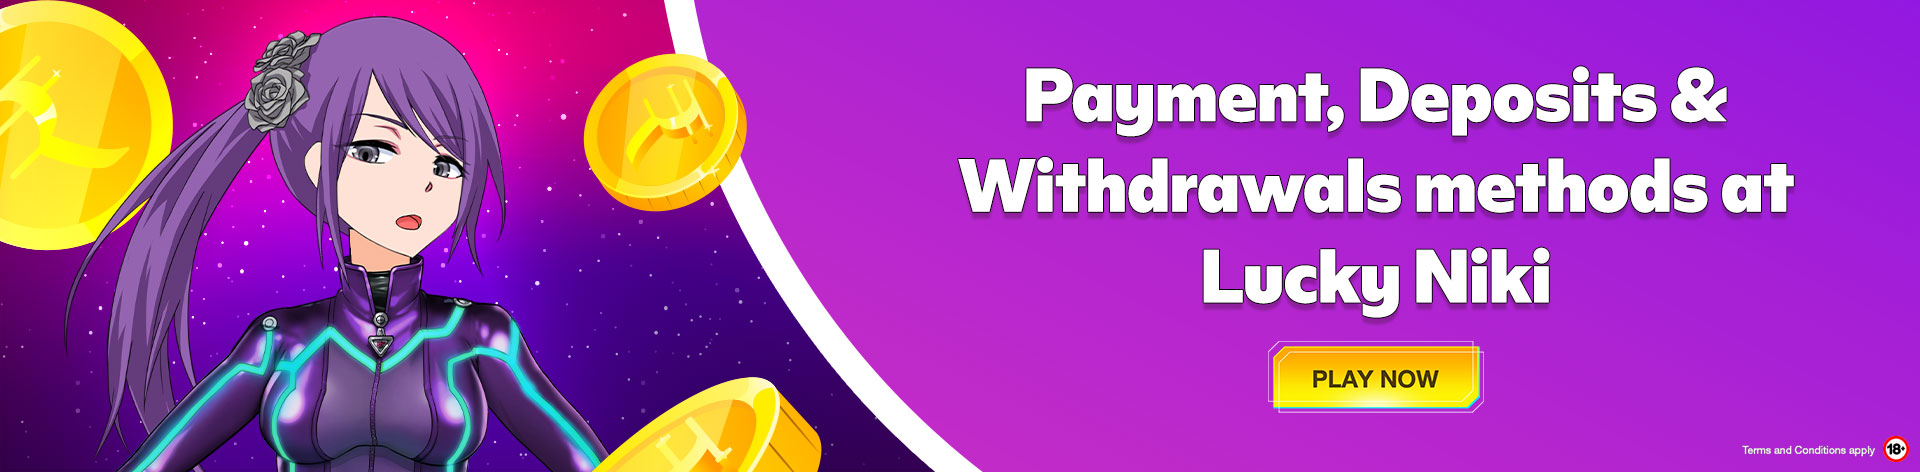 payments-deposits-withdrawals